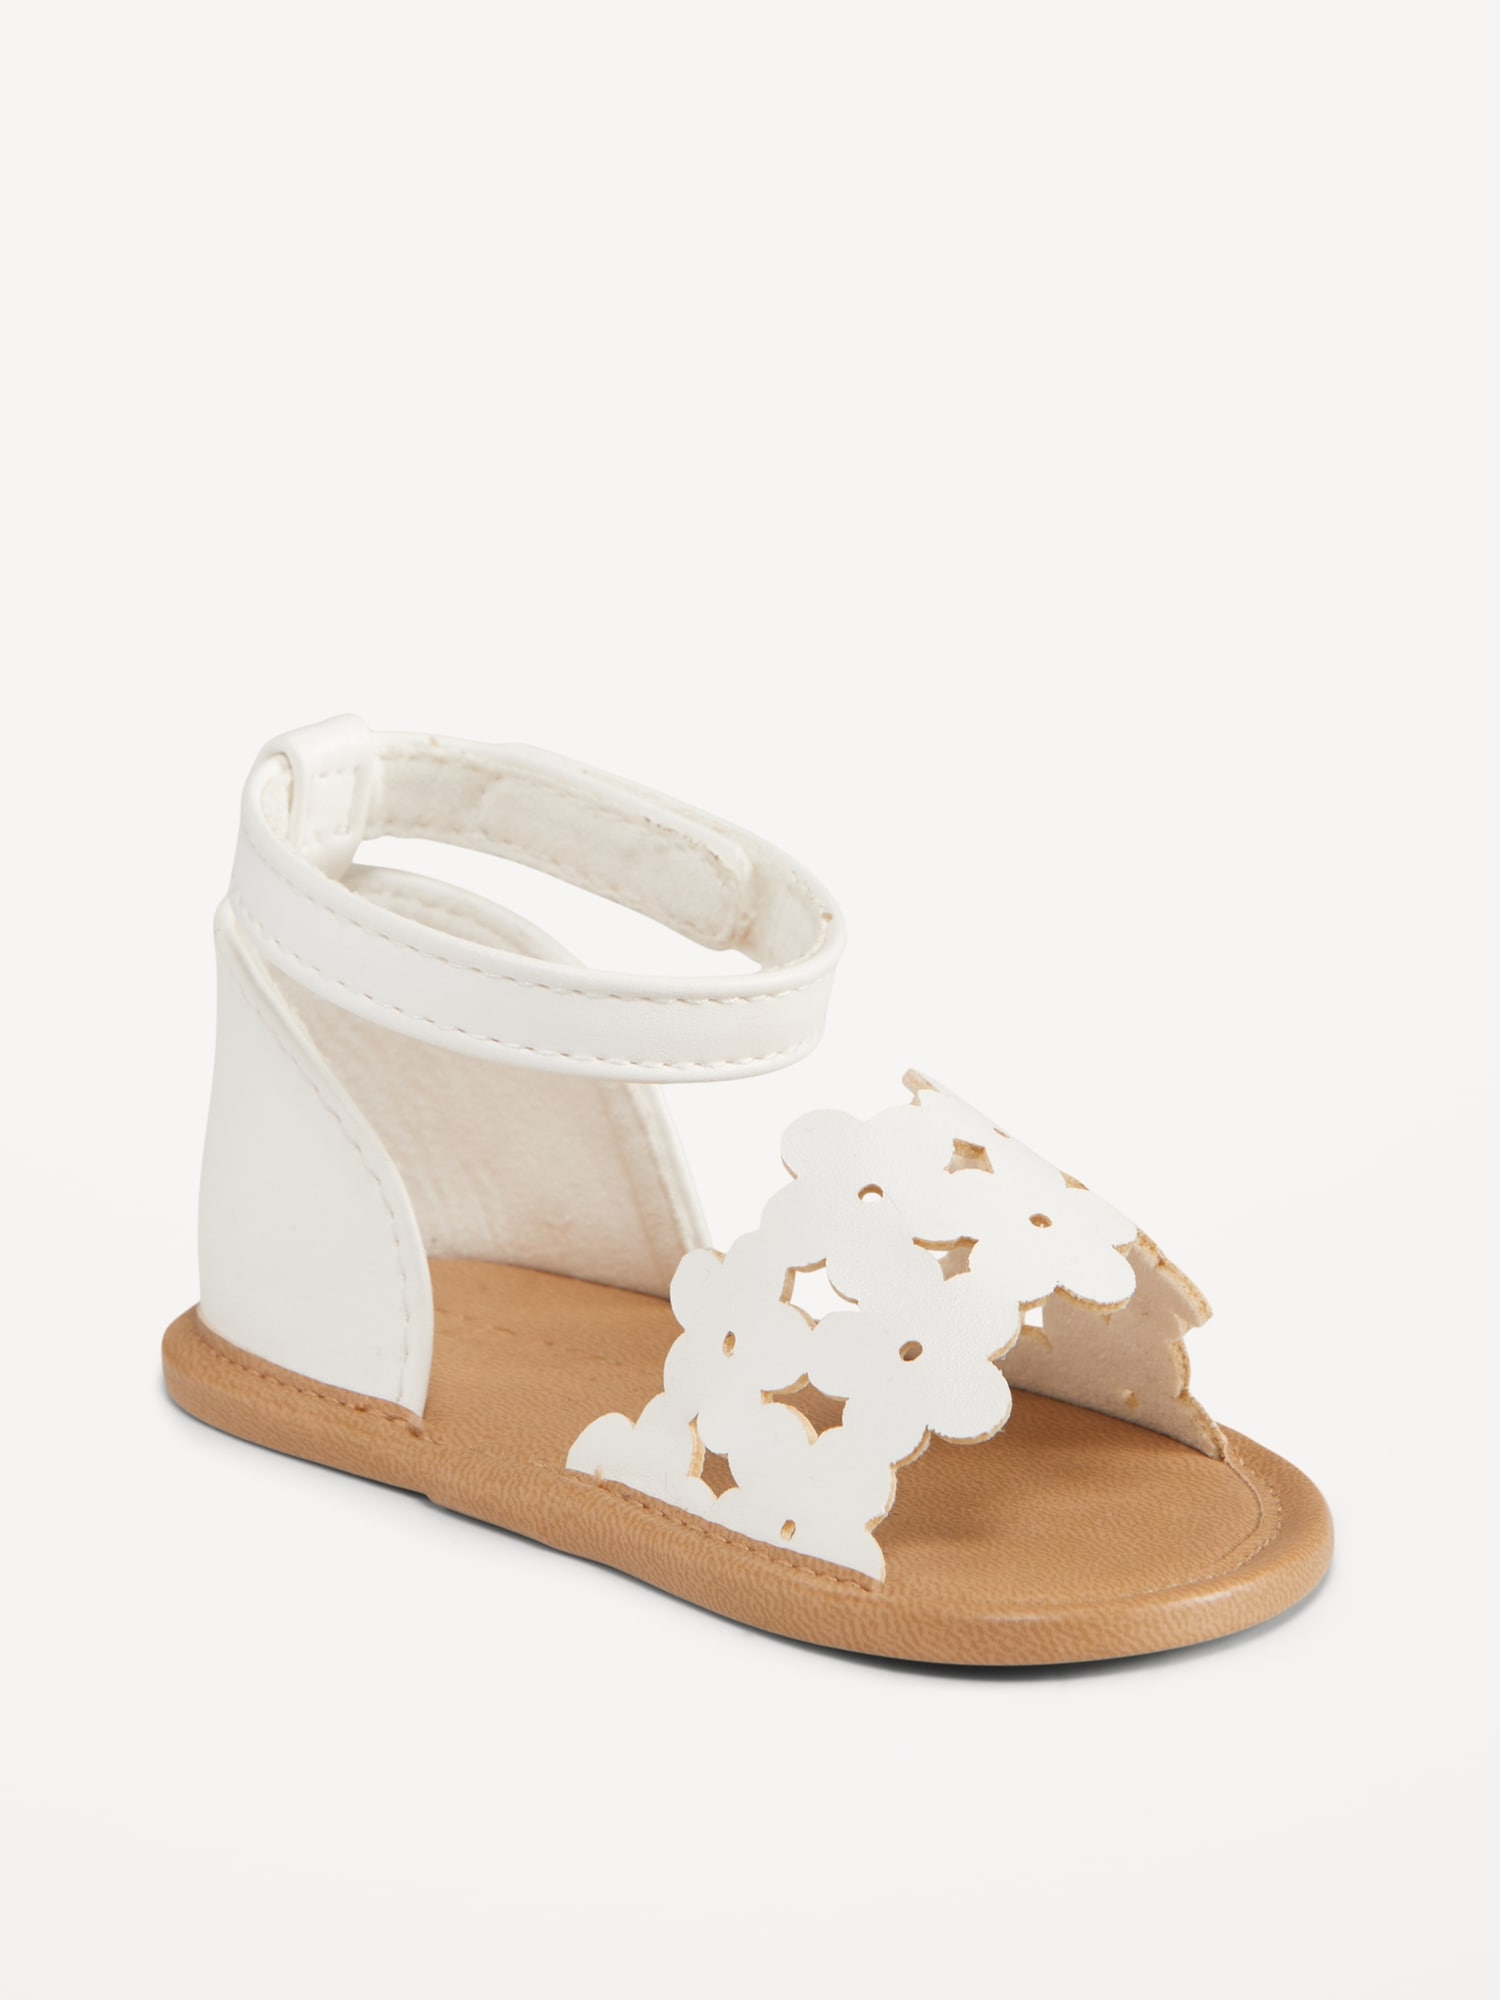 Faux-Leather Floral Cutout Sandals for Baby